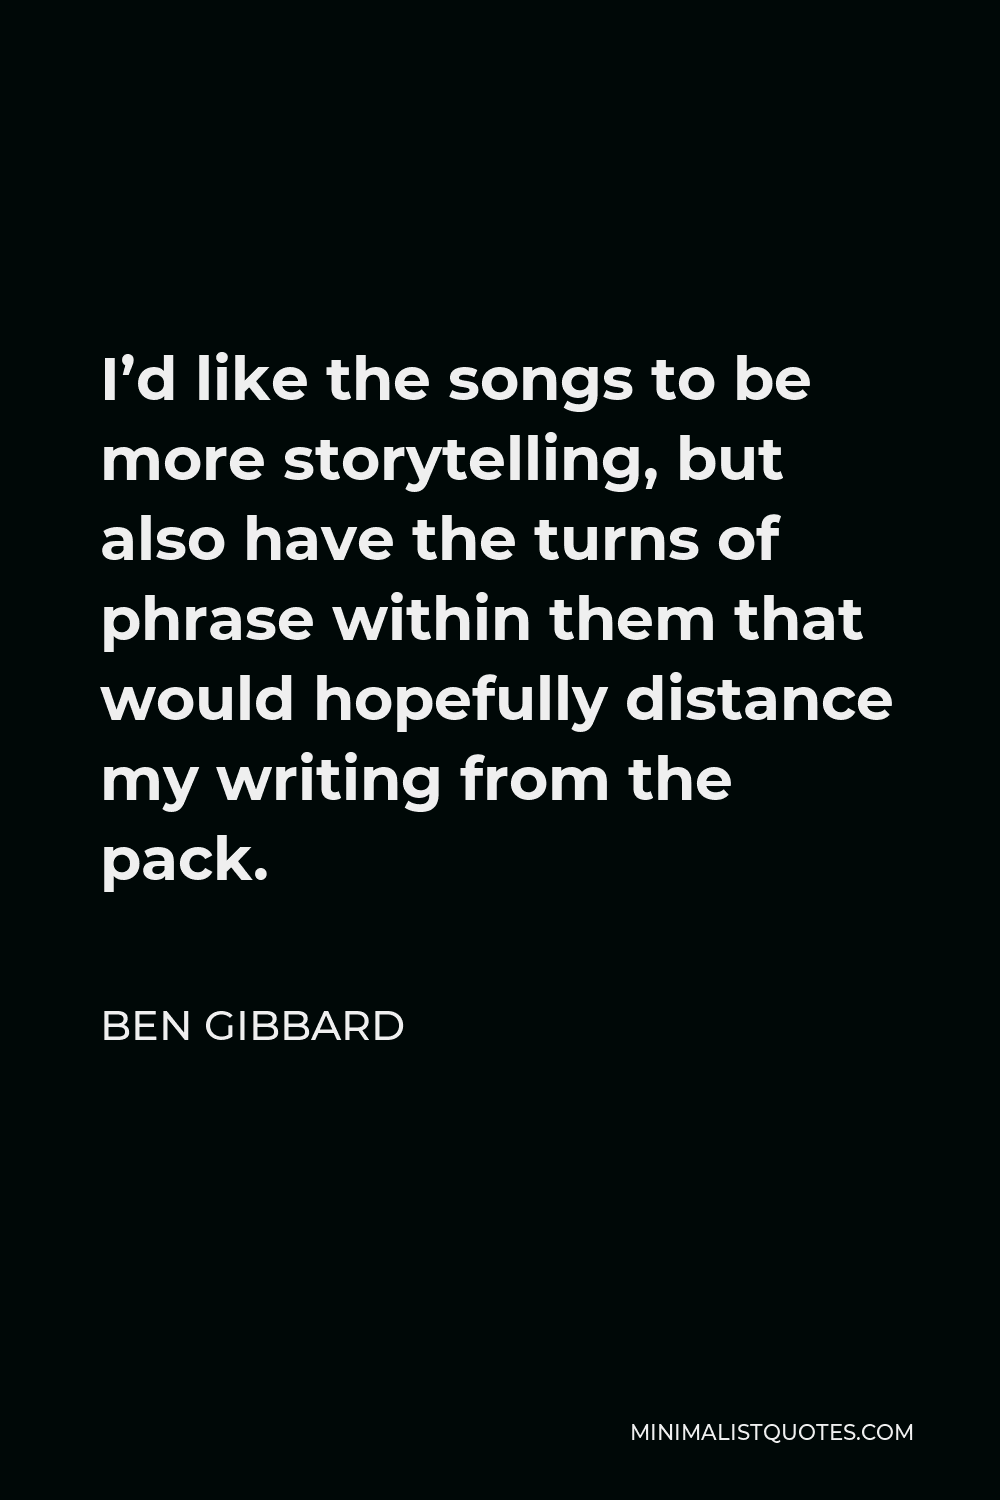 Ben Gibbard Quote - I’d like the songs to be more storytelling, but also have the turns of phrase within them that would hopefully distance my writing from the pack.